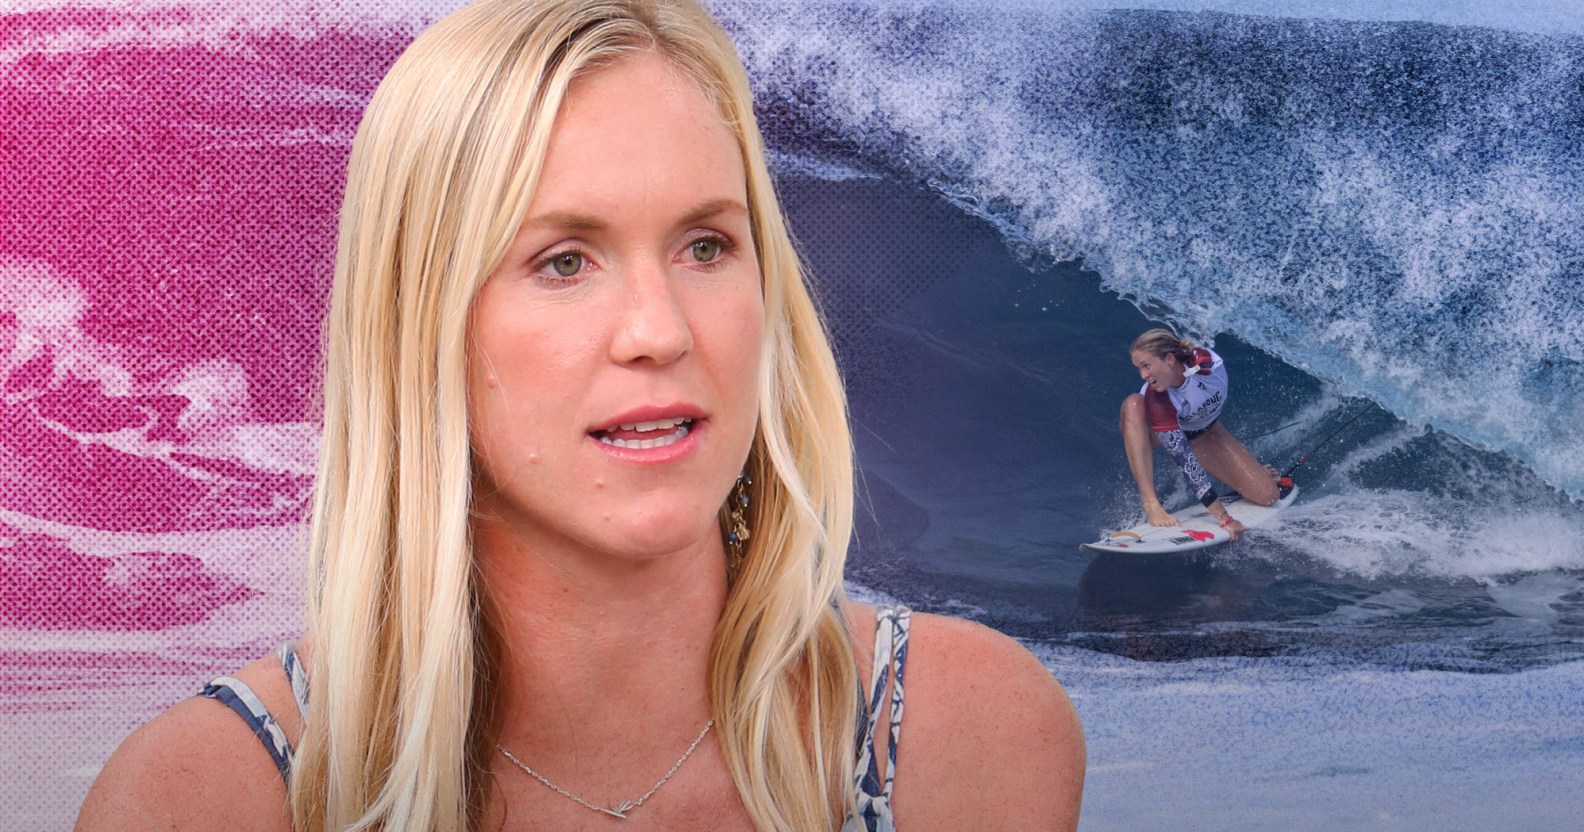 A graphic showing a cut-out image of pro surfer Bethany Hamilton set against another image of her surfing in the background with a pink tint showing across the left side of the picture